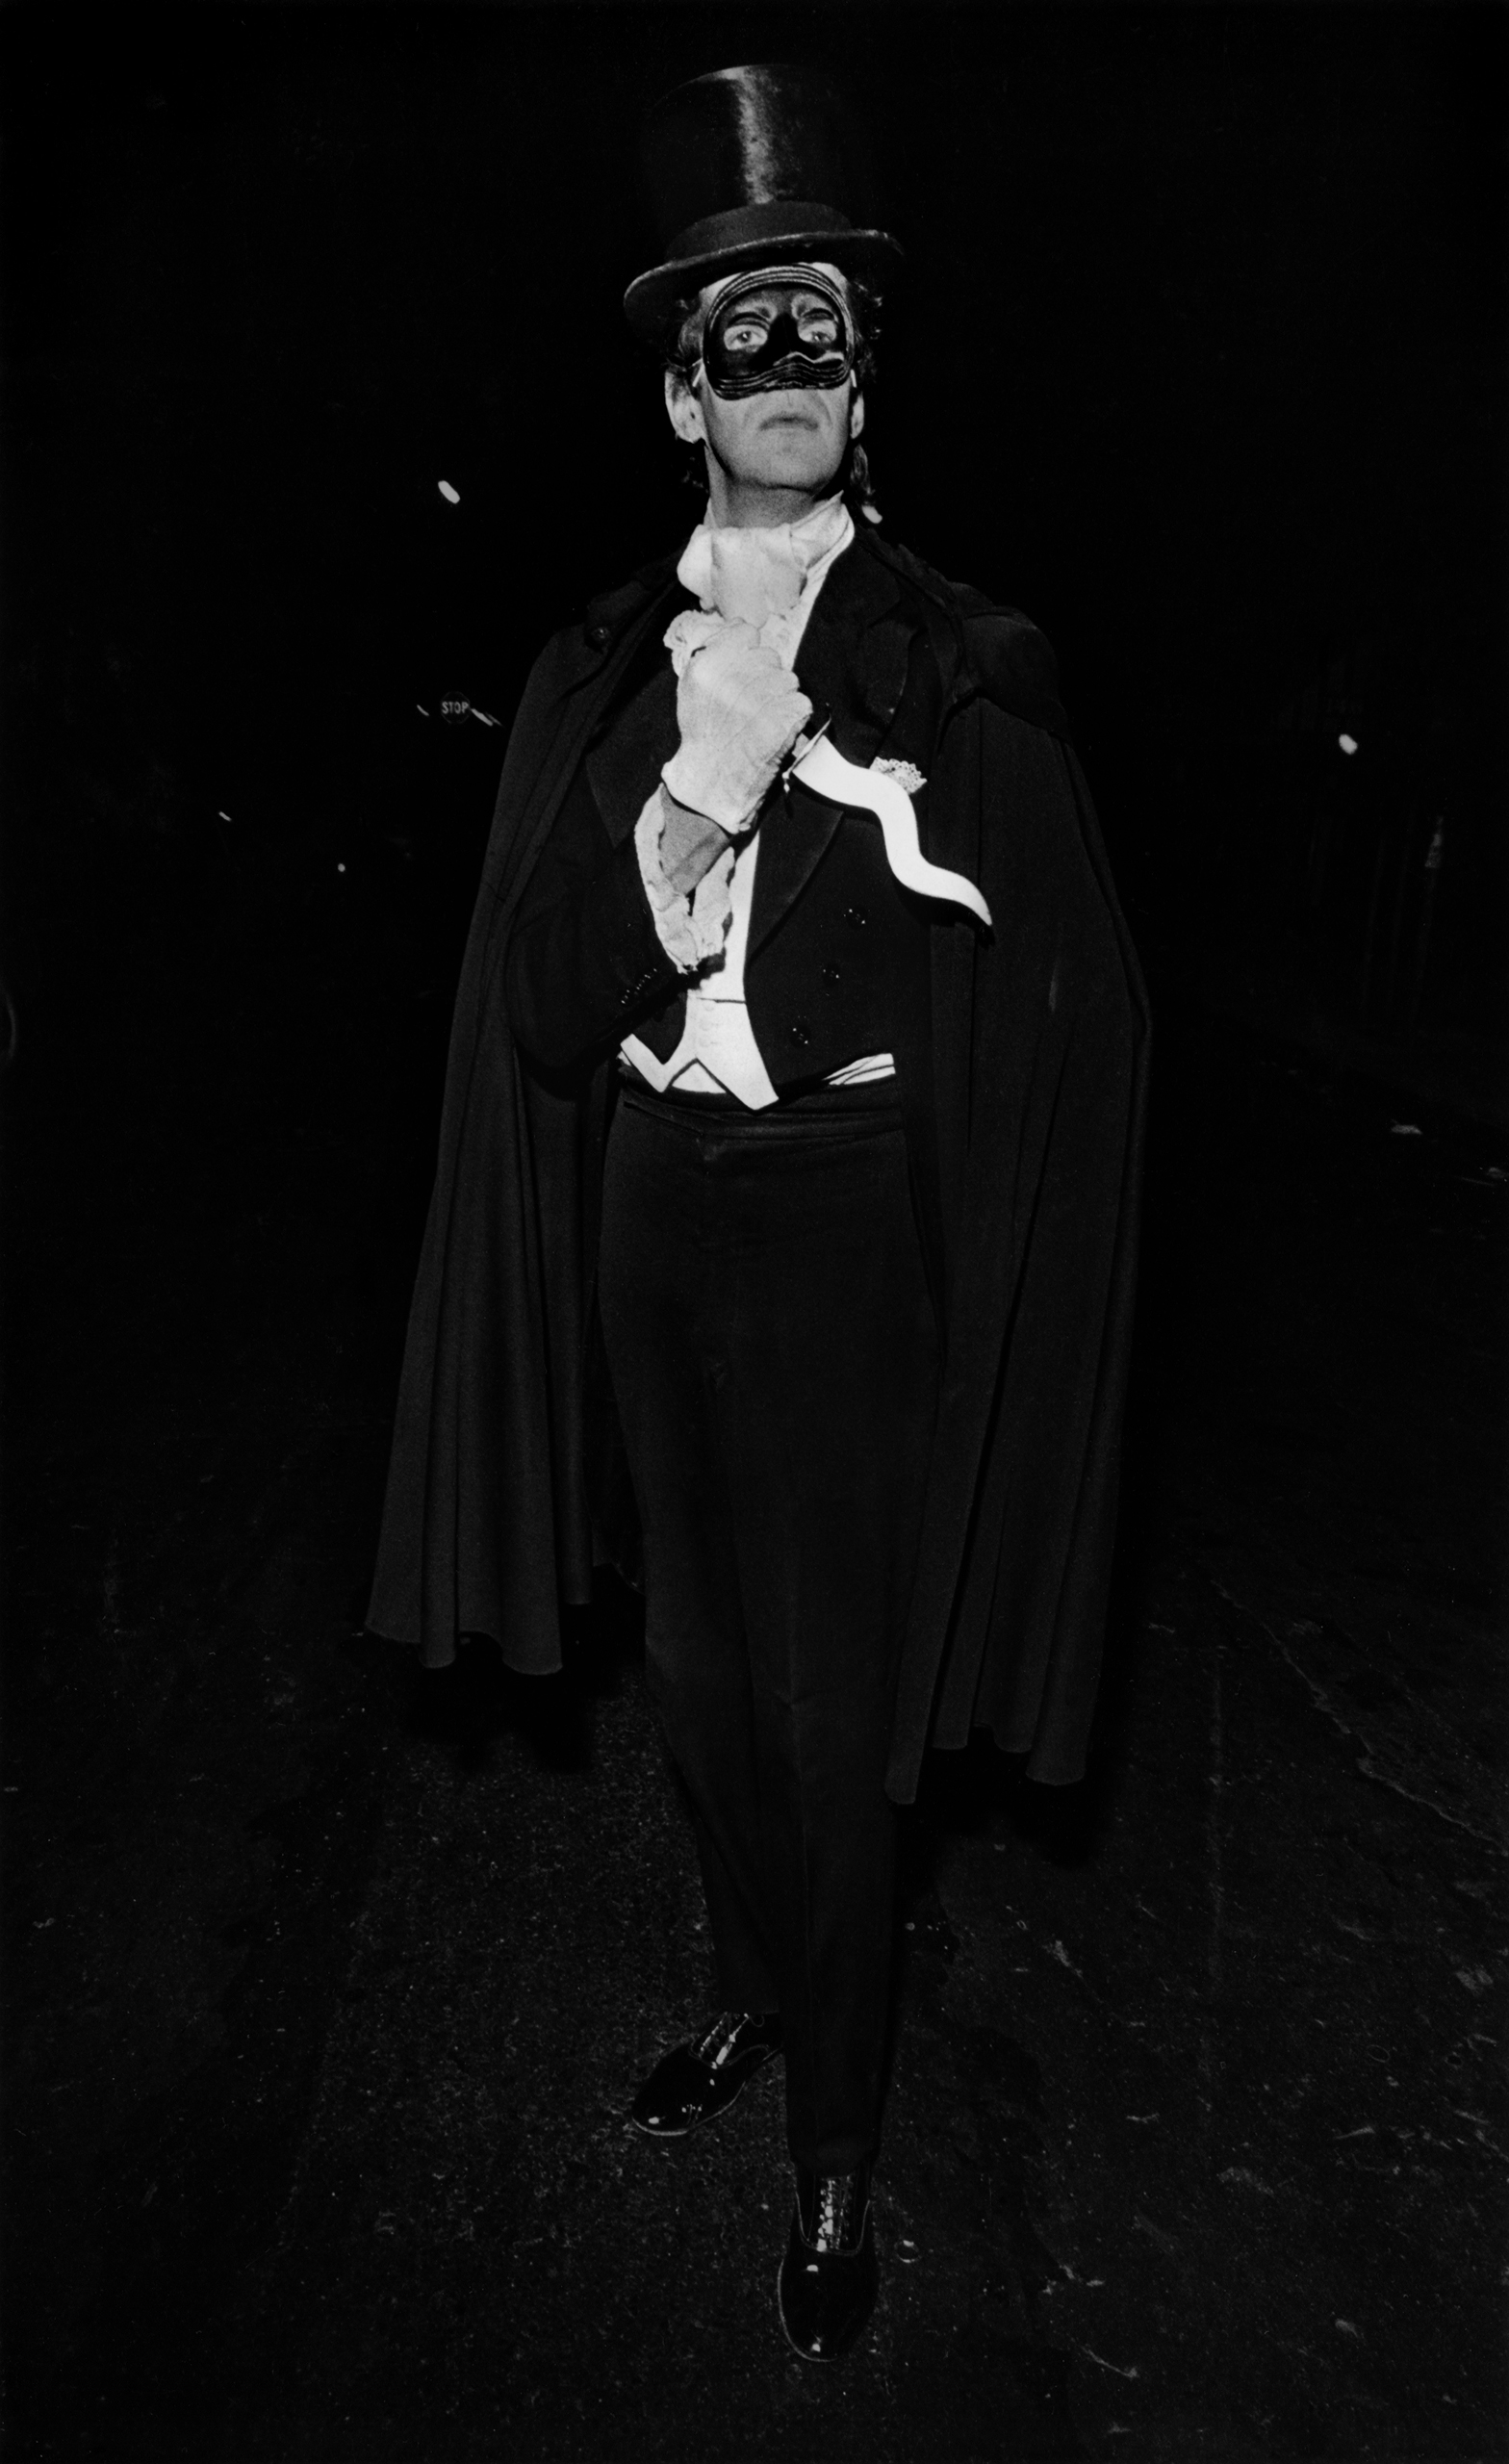 A dapper man with a dagger strikes a pose at the New York City Halloween Parade, 1978.